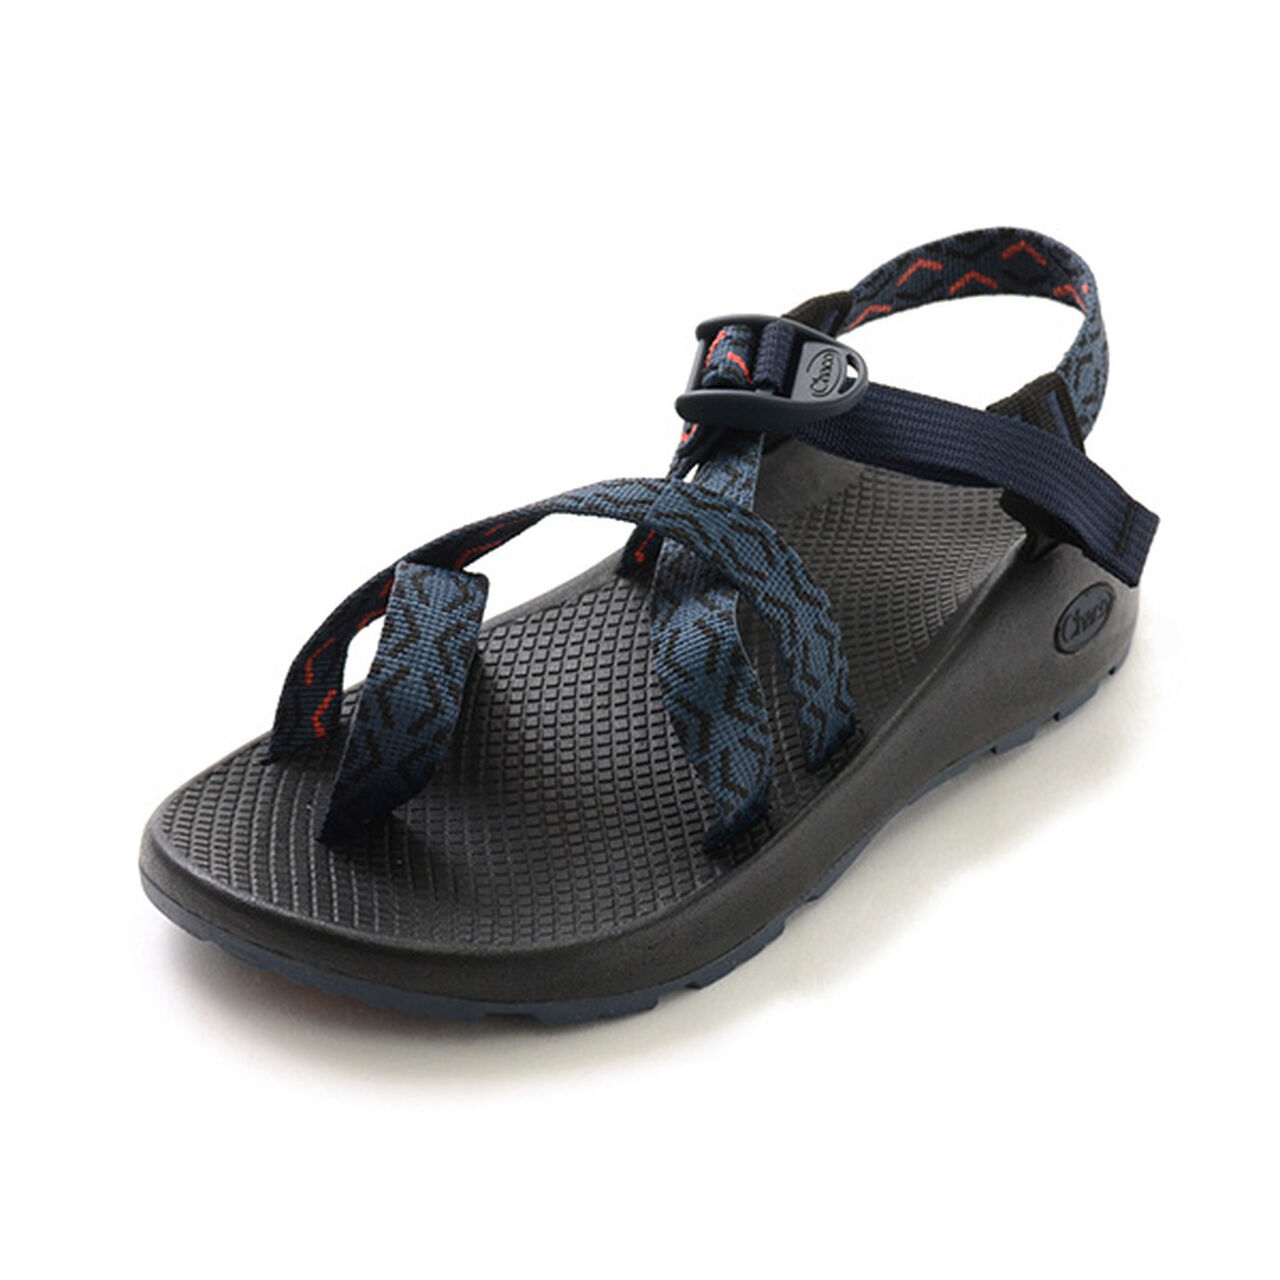 Z2 classic / Strap Sandals,S-Navy, large image number 0